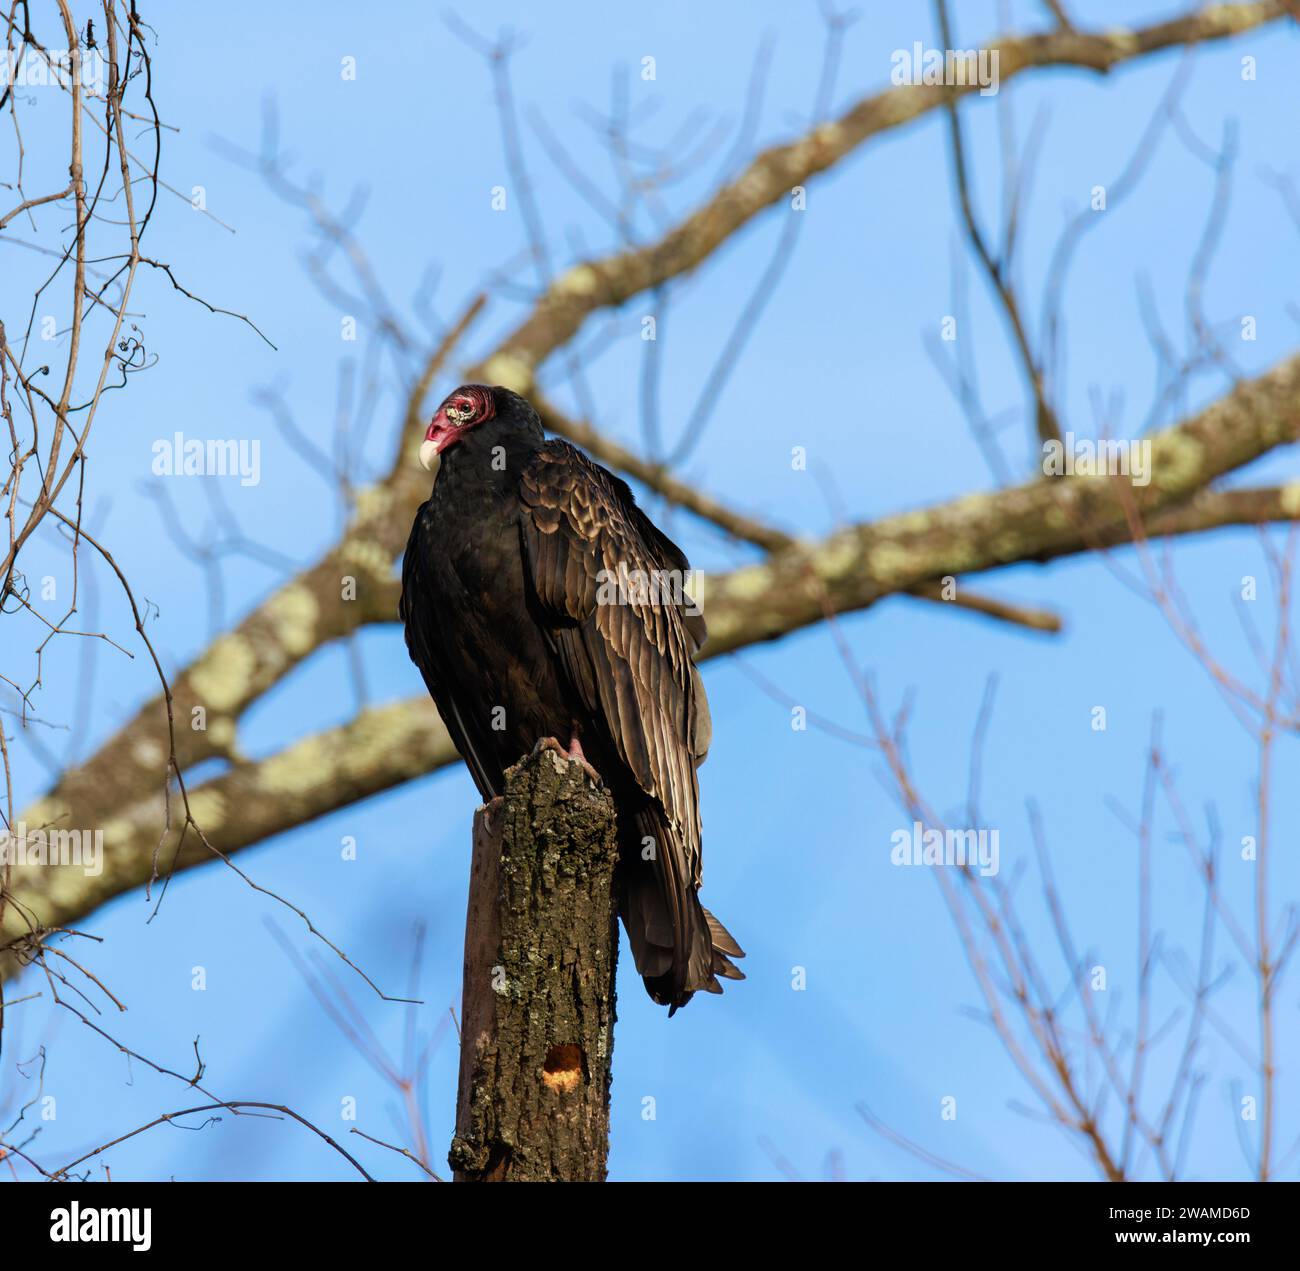 Turkey Vulture perched on top of a dead tree with a blue sky in the background Stock Photo